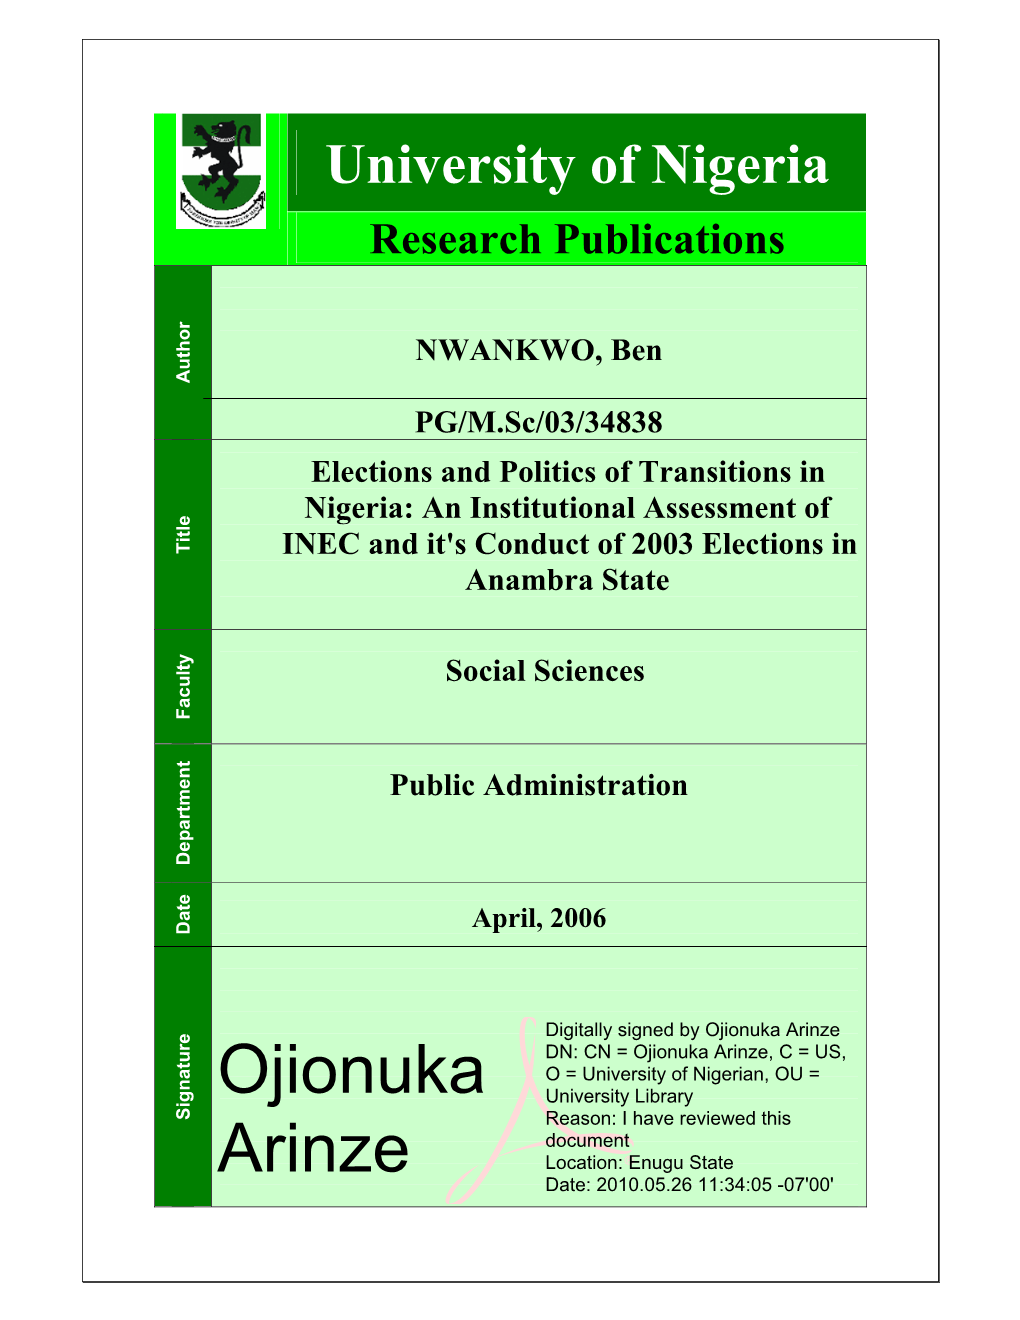 Elections and Politics of Transitions in Nigeria: an Institutional Assessment Of